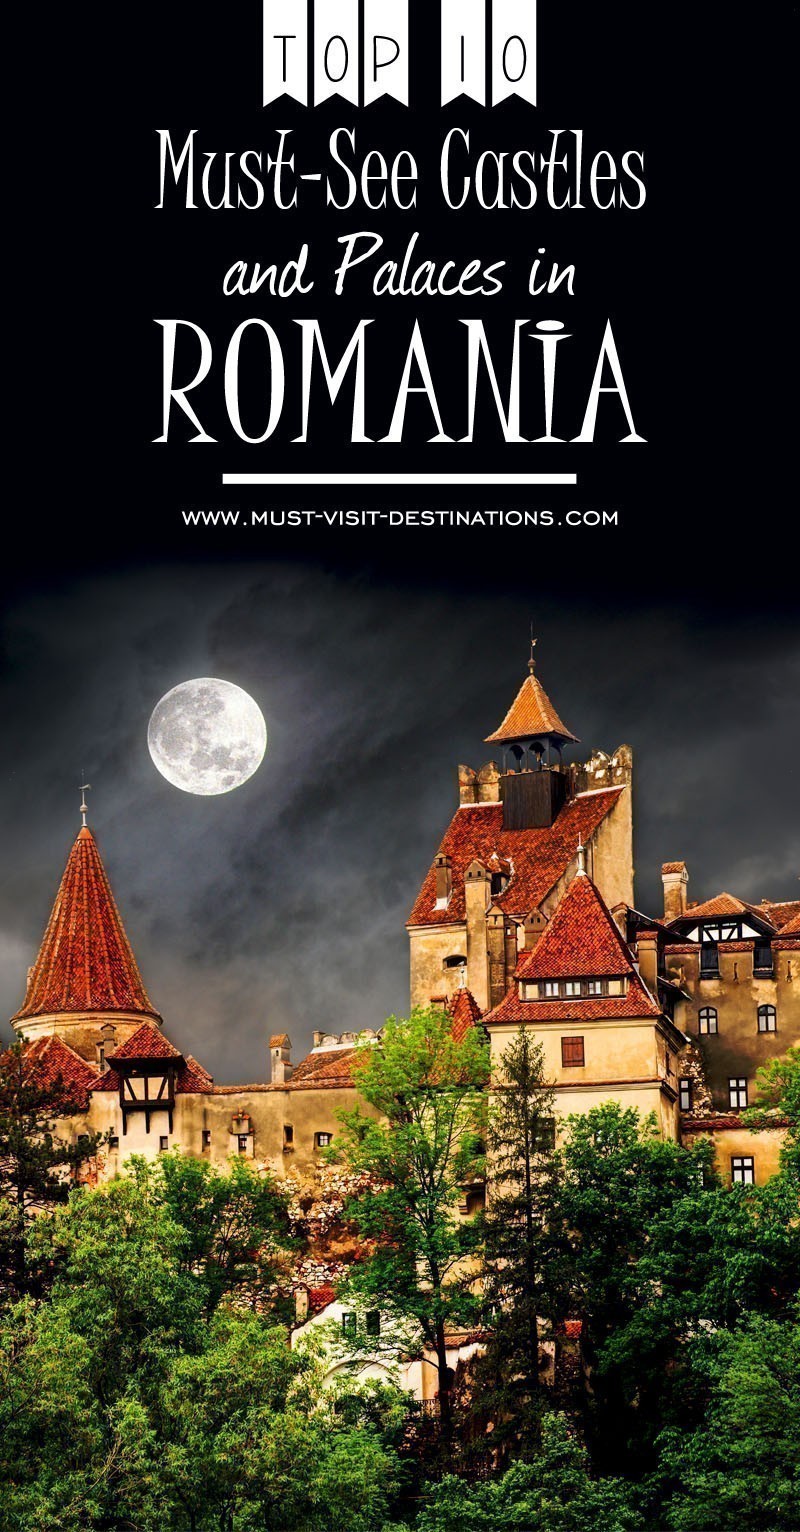 TOP 10 Must-see Castles and Palaces in Romania #travel #Romania